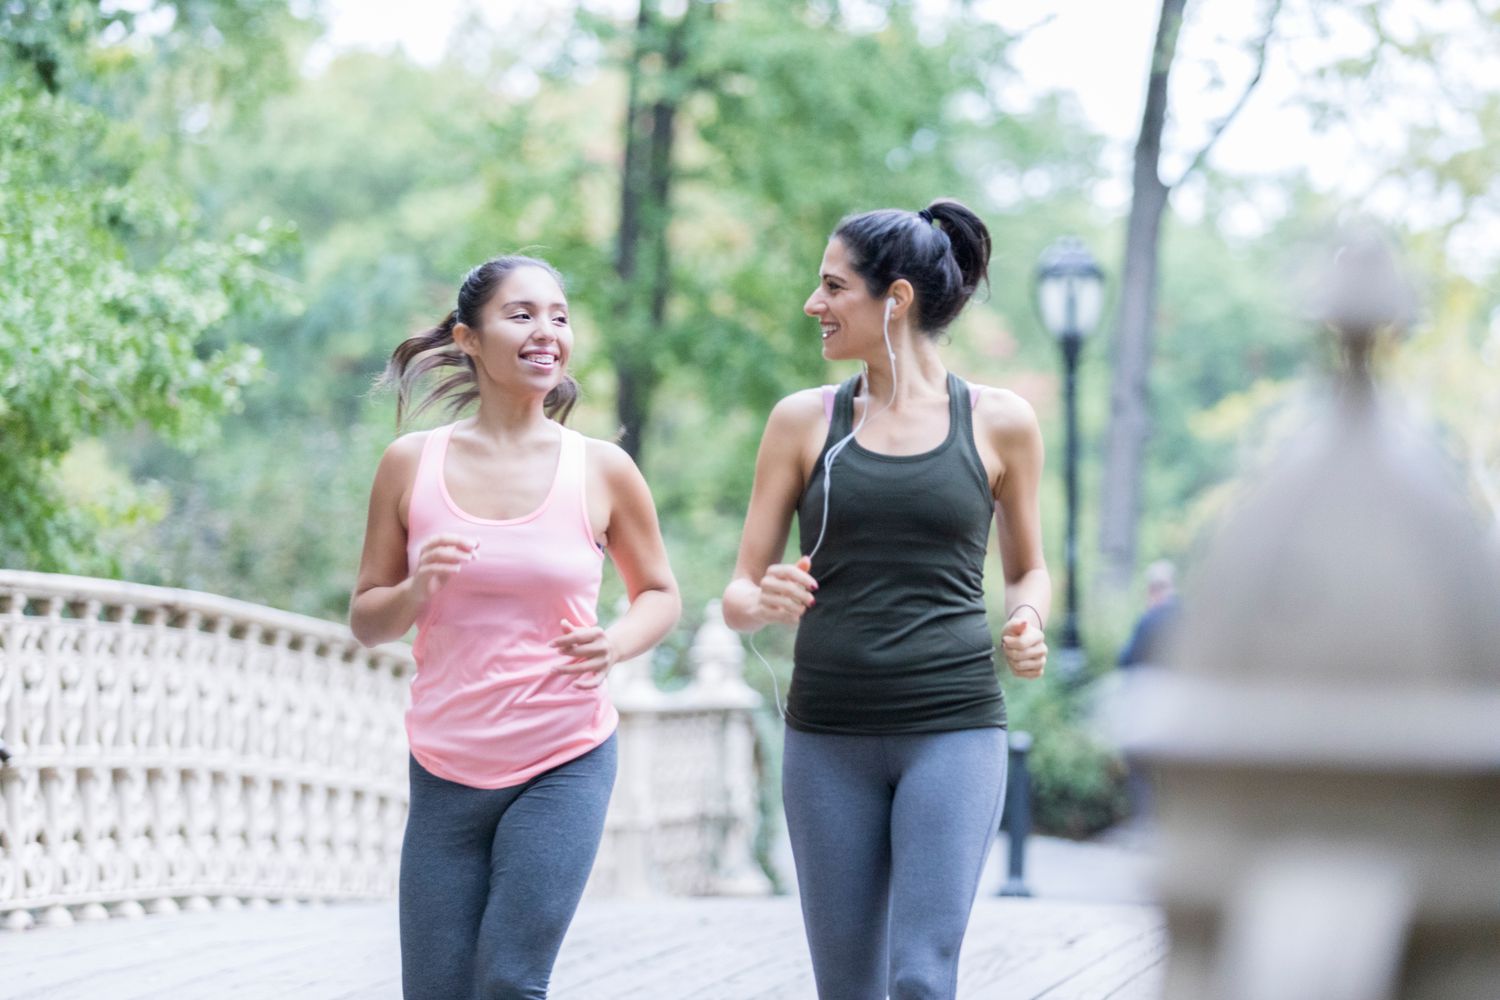 Two women walking in a park to exercise.